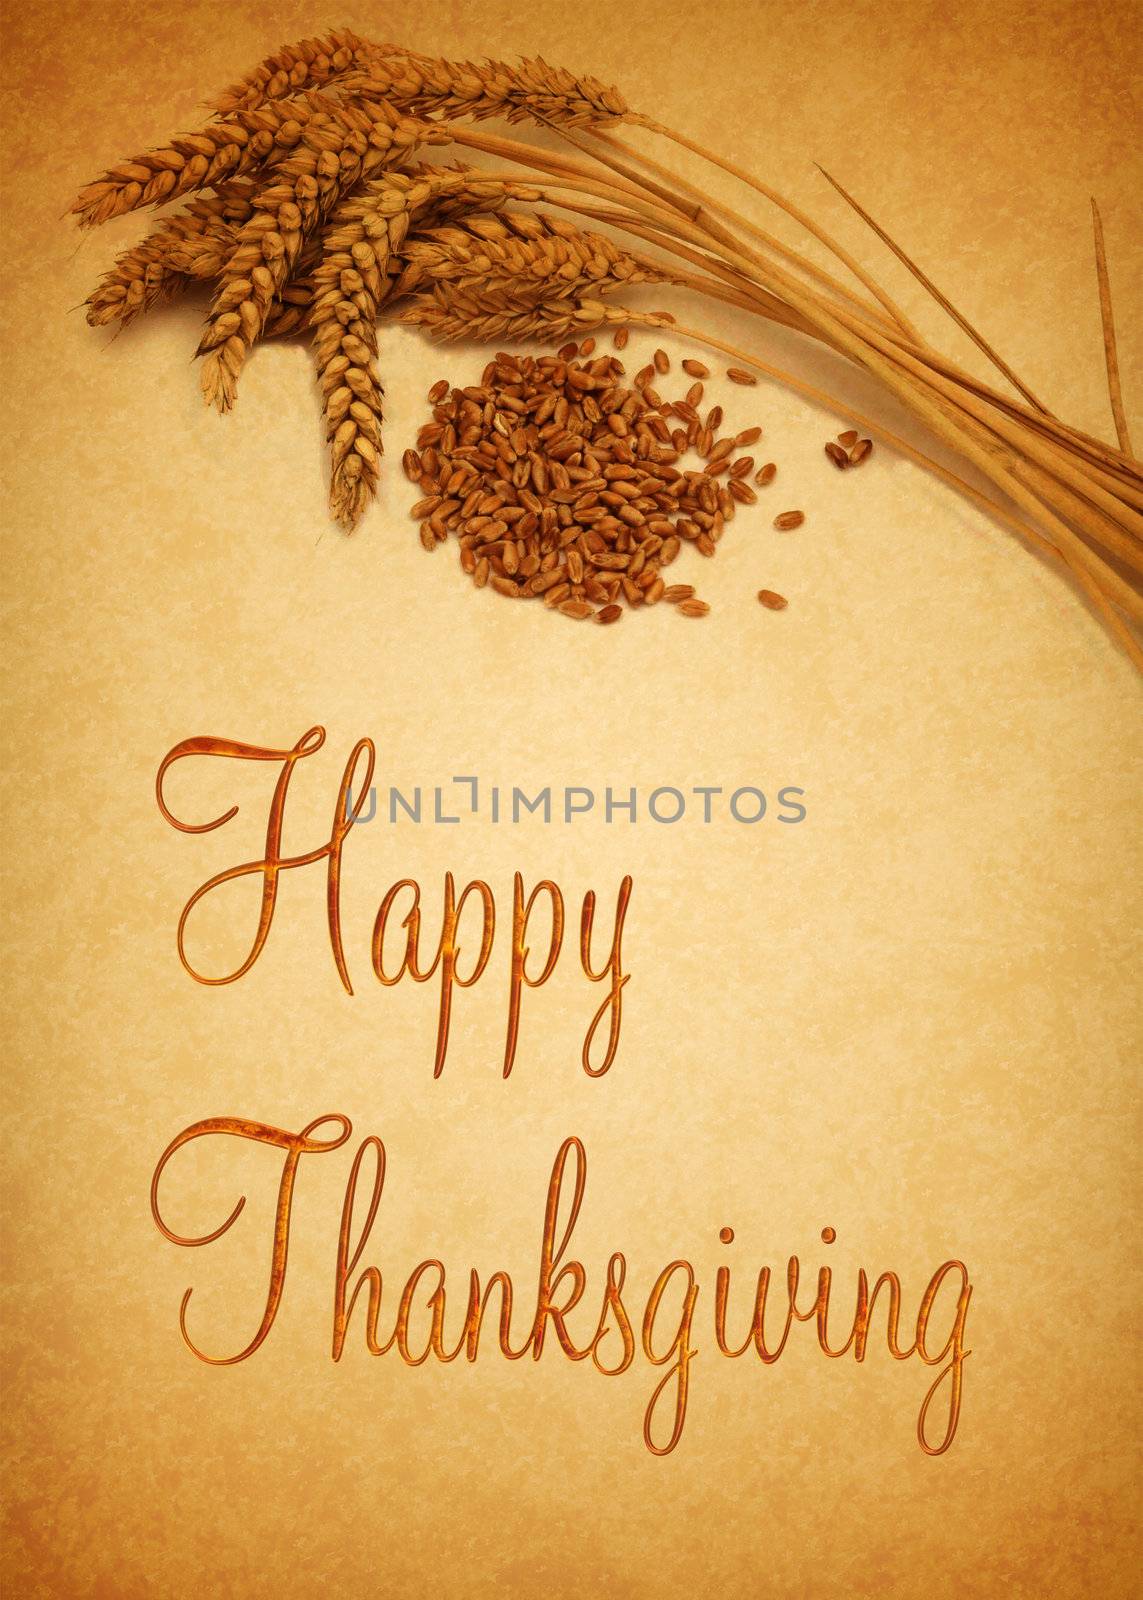 Thanksgiving Greetings, illustration with wheat.